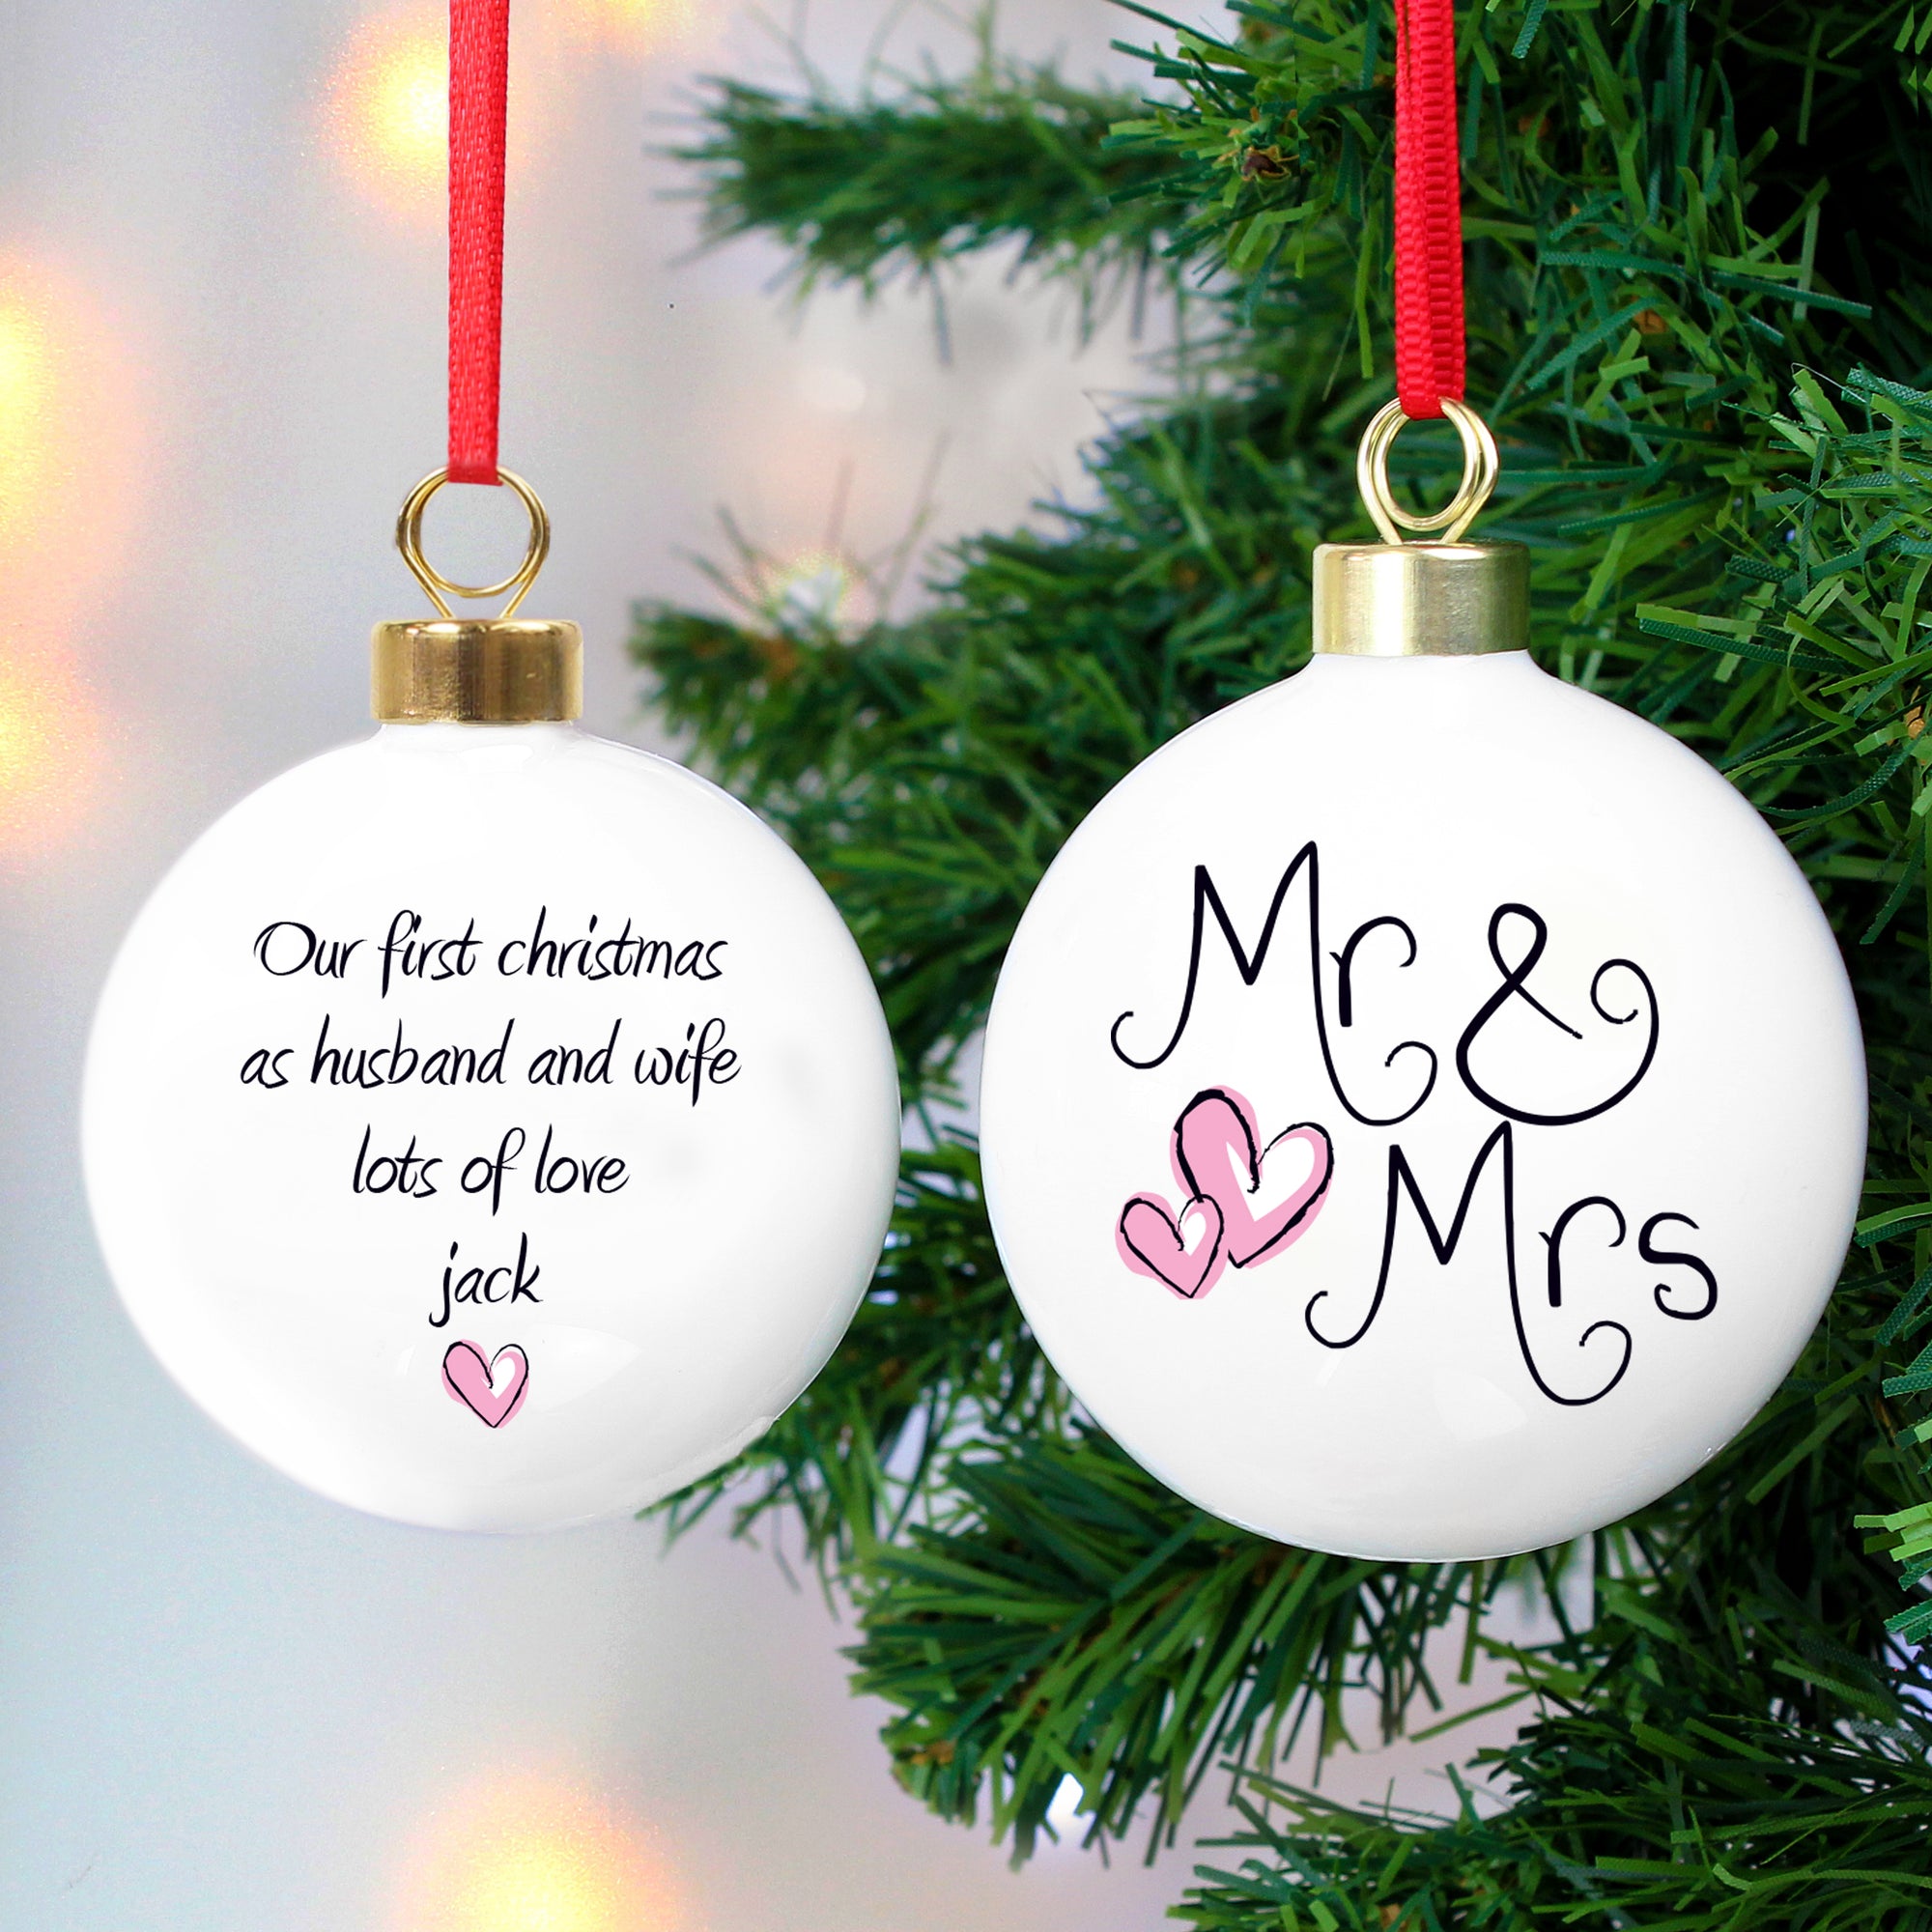 Personalised Mr & Mrs Christmas decoration for a married couple. This round white ceramic Christmas bauble has 'Mr & Mrs' printed on the front in a hand-written style font along with two pink love hearts. The back of the bauble can be personalised with your own special message and has another pink heart printed below the text.